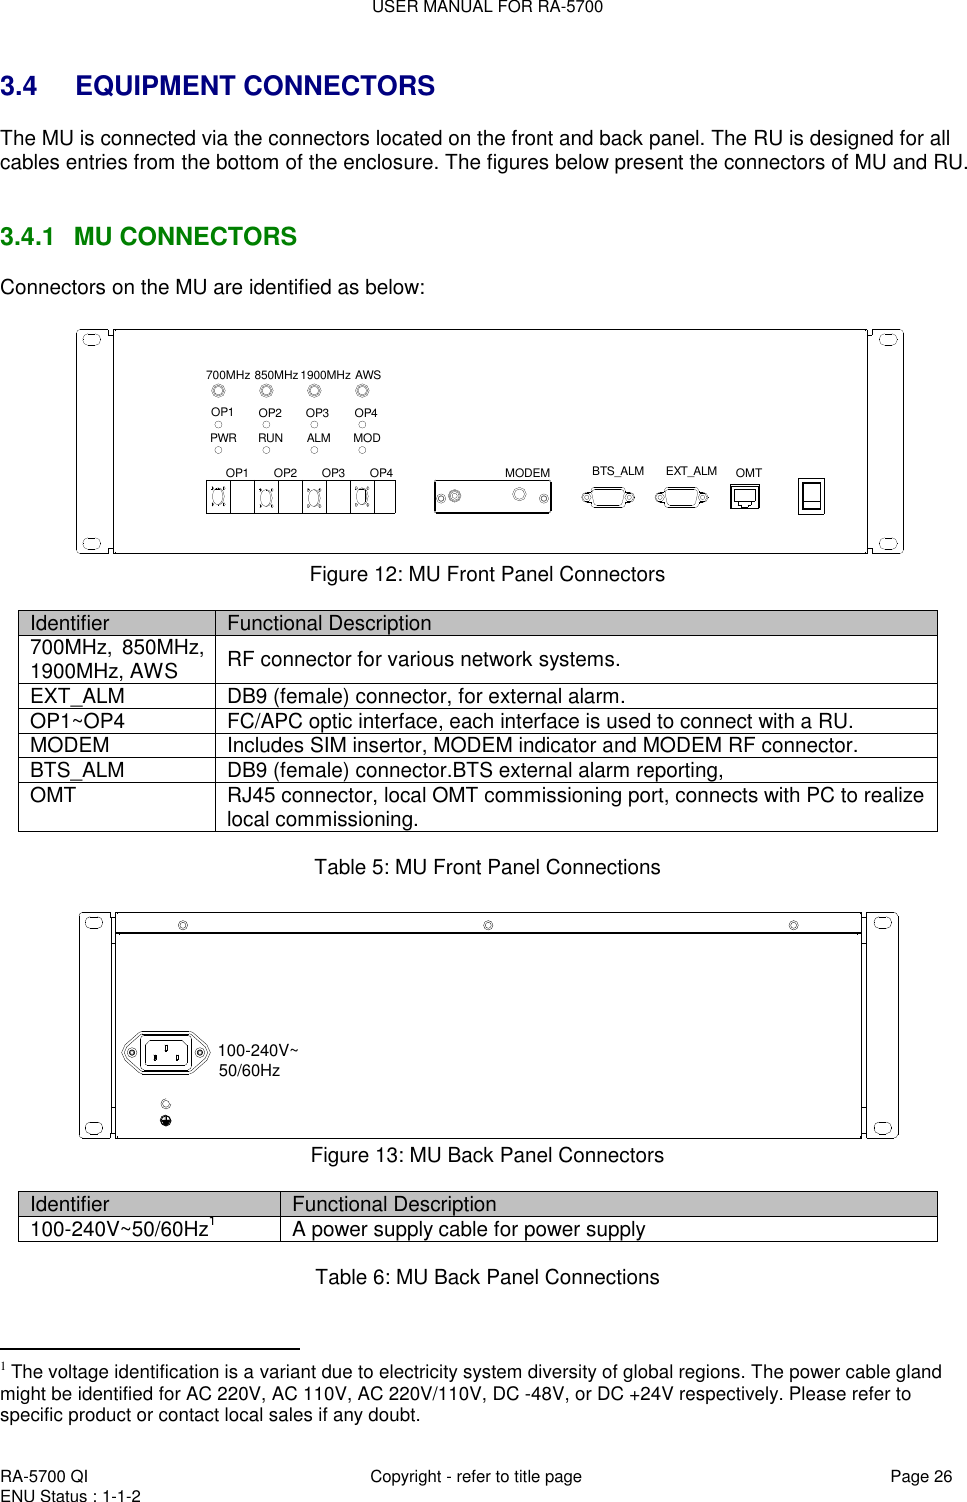 USER MANUAL FOR RA-5700  RA-5700 QI  Copyright - refer to title page Page 26 ENU Status : 1-1-2    3.4  EQUIPMENT CONNECTORS The MU is connected via the connectors located on the front and back panel. The RU is designed for all cables entries from the bottom of the enclosure. The figures below present the connectors of MU and RU.   3.4.1  MU CONNECTORS Connectors on the MU are identified as below:   700MHz 850MHz1900MHz AWSOP3 OP4OP2OP1PWR MODALMRUNOP4OP3OP2OP1 MODEM BTS_ALM OMTEXT_ALM Figure 12: MU Front Panel Connectors  Identifier Functional Description 700MHz,  850MHz, 1900MHz, AWS RF connector for various network systems.  EXT_ALM DB9 (female) connector, for external alarm. OP1~OP4 FC/APC optic interface, each interface is used to connect with a RU.  MODEM Includes SIM insertor, MODEM indicator and MODEM RF connector.  BTS_ALM DB9 (female) connector.BTS external alarm reporting,  OMT RJ45 connector, local OMT commissioning port, connects with PC to realize local commissioning.   Table 5: MU Front Panel Connections  100-240V~50/60Hz Figure 13: MU Back Panel Connectors  Identifier Functional Description 100-240V~50/60Hz1 A power supply cable for power supply  Table 6: MU Back Panel Connections                                                   1 The voltage identification is a variant due to electricity system diversity of global regions. The power cable gland might be identified for AC 220V, AC 110V, AC 220V/110V, DC -48V, or DC +24V respectively. Please refer to specific product or contact local sales if any doubt. 